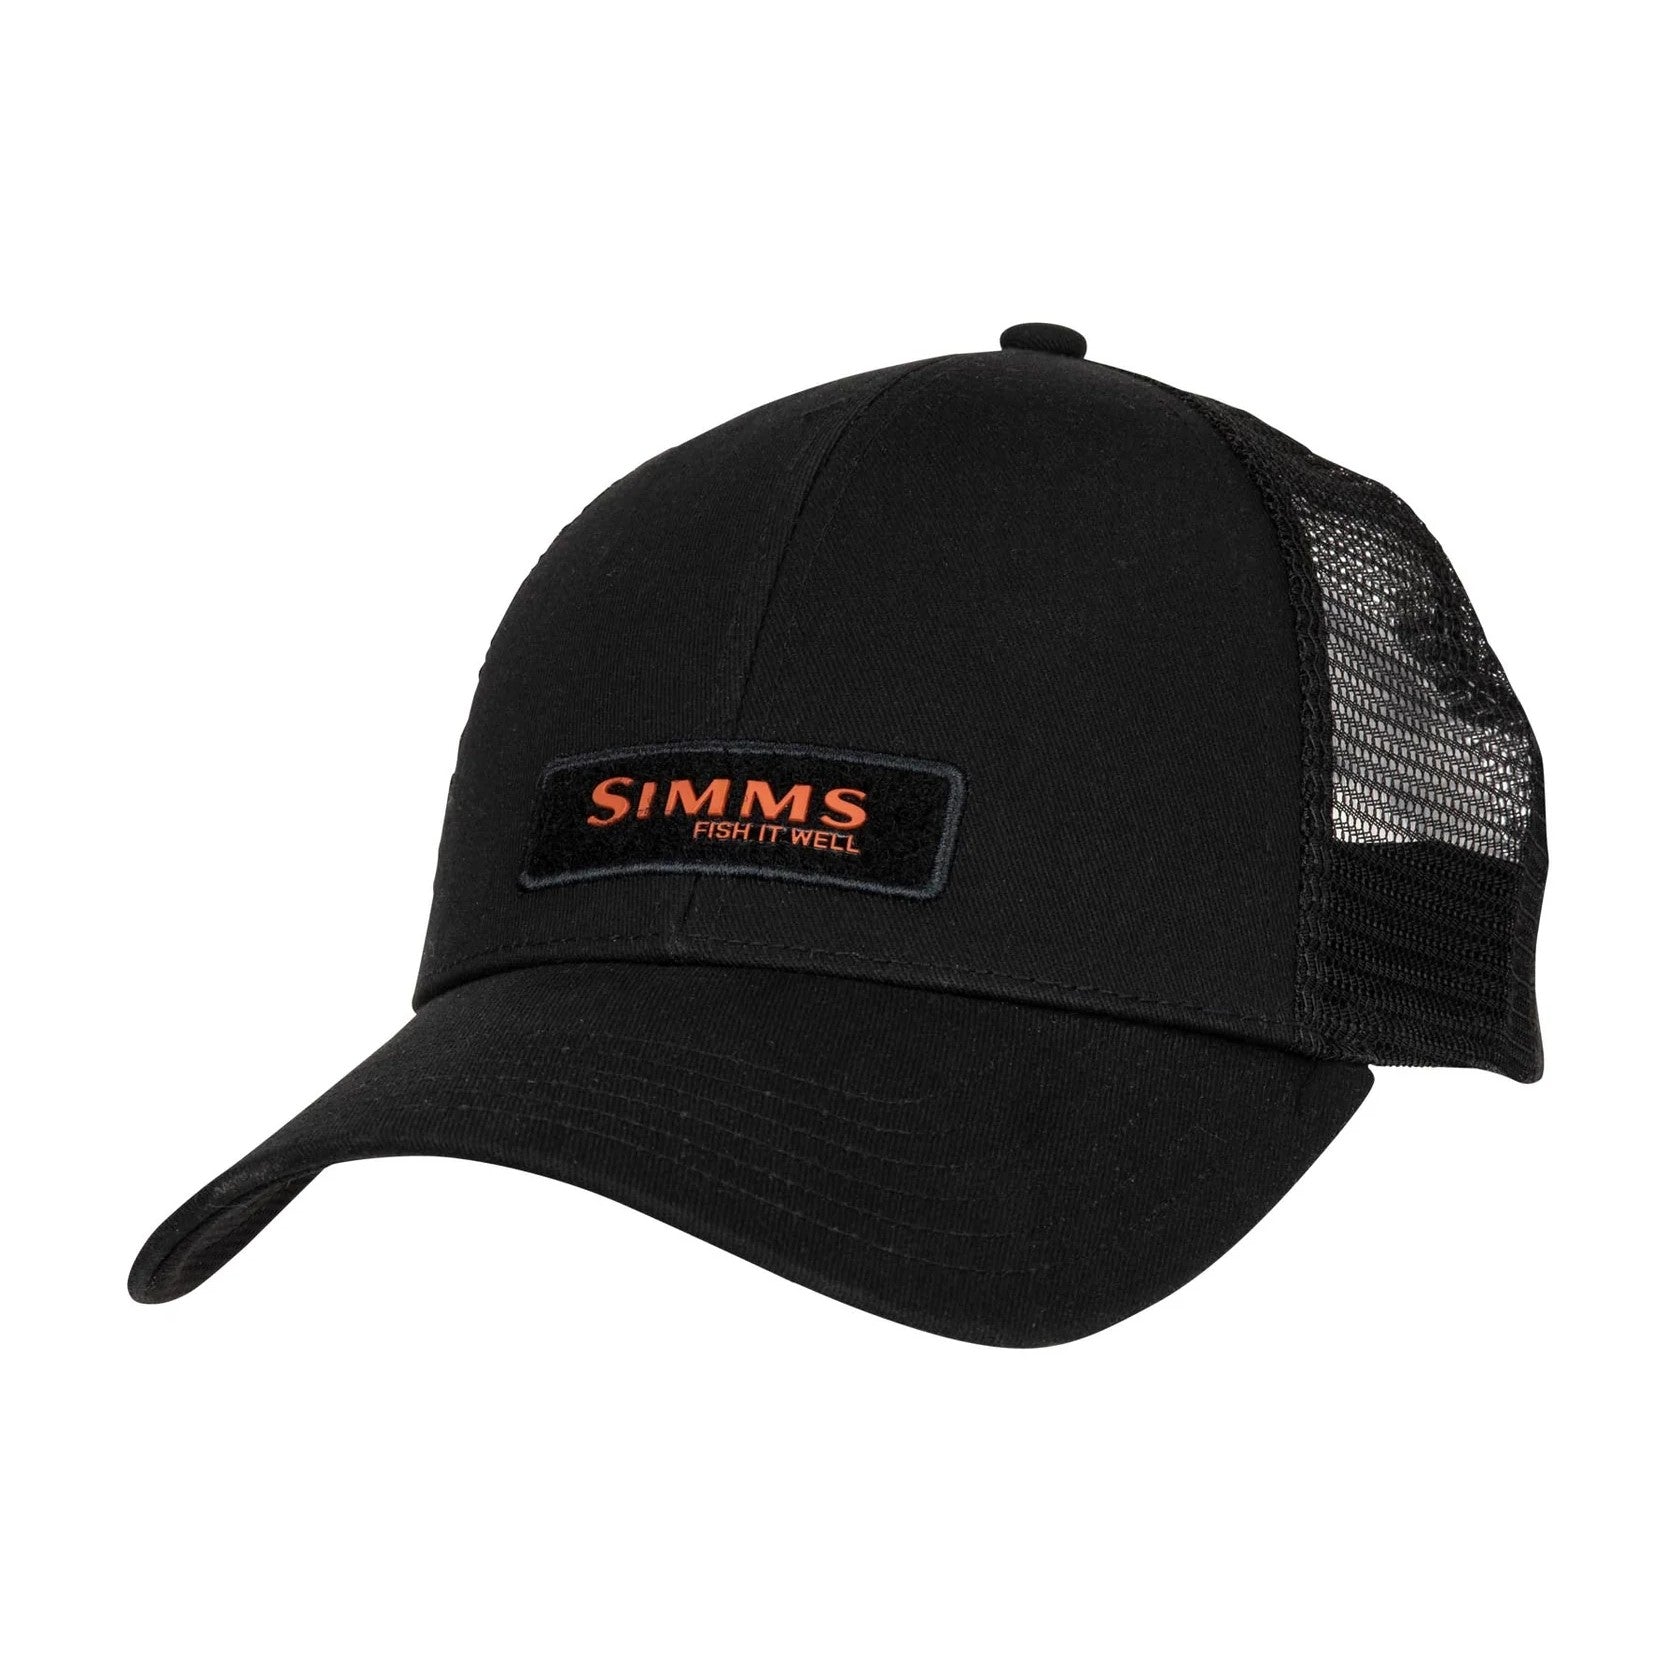 Simms Small Fit Fish It Well Forever Trucker Cap Black